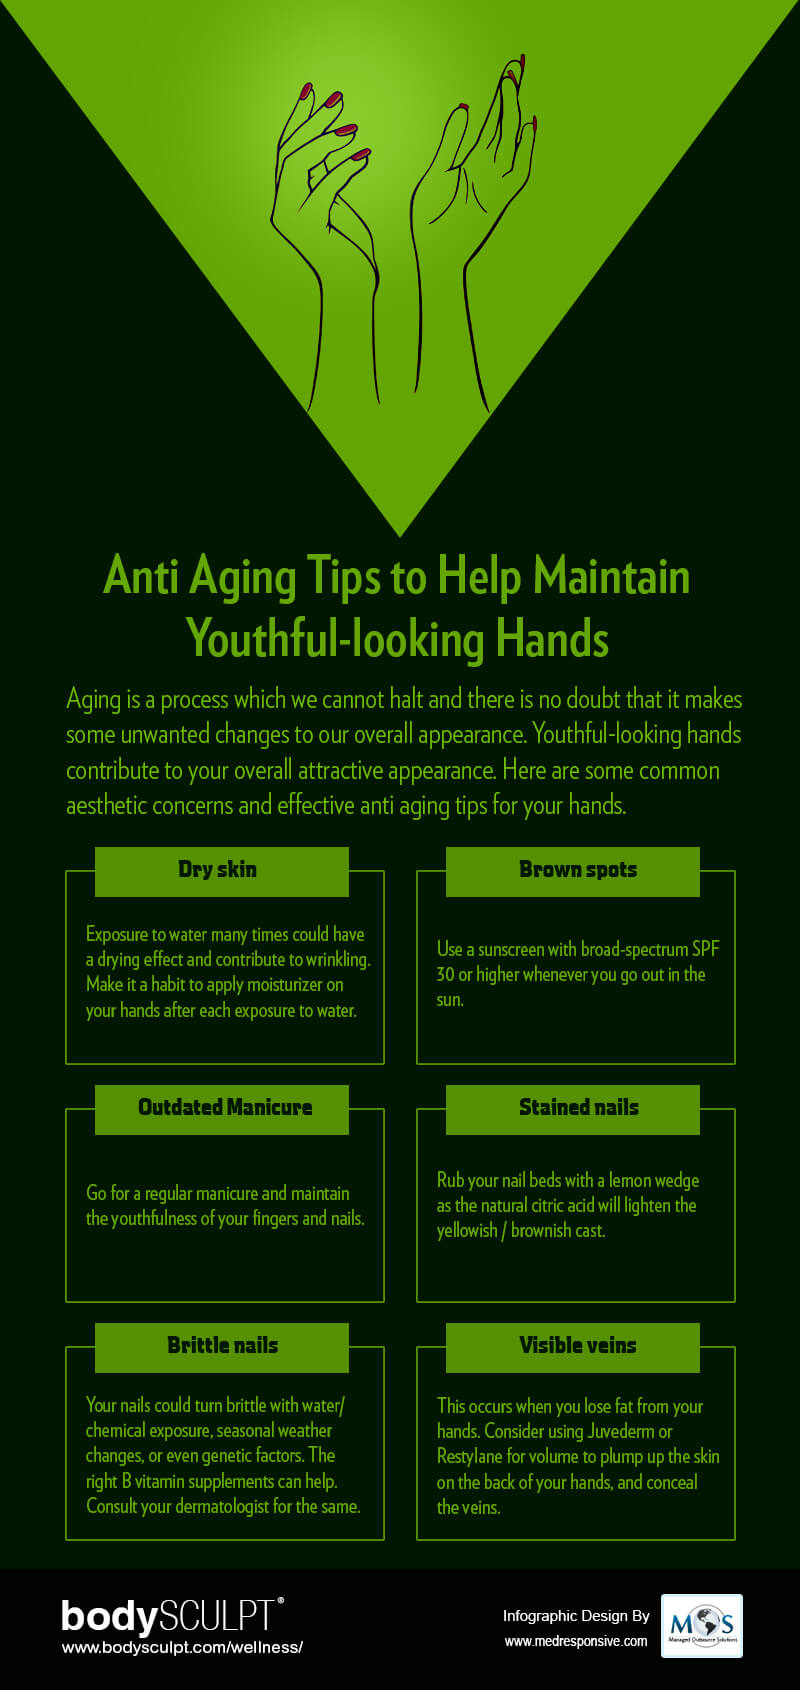 Anti Aging Tips to Help Maintain Youthful-looking Hands